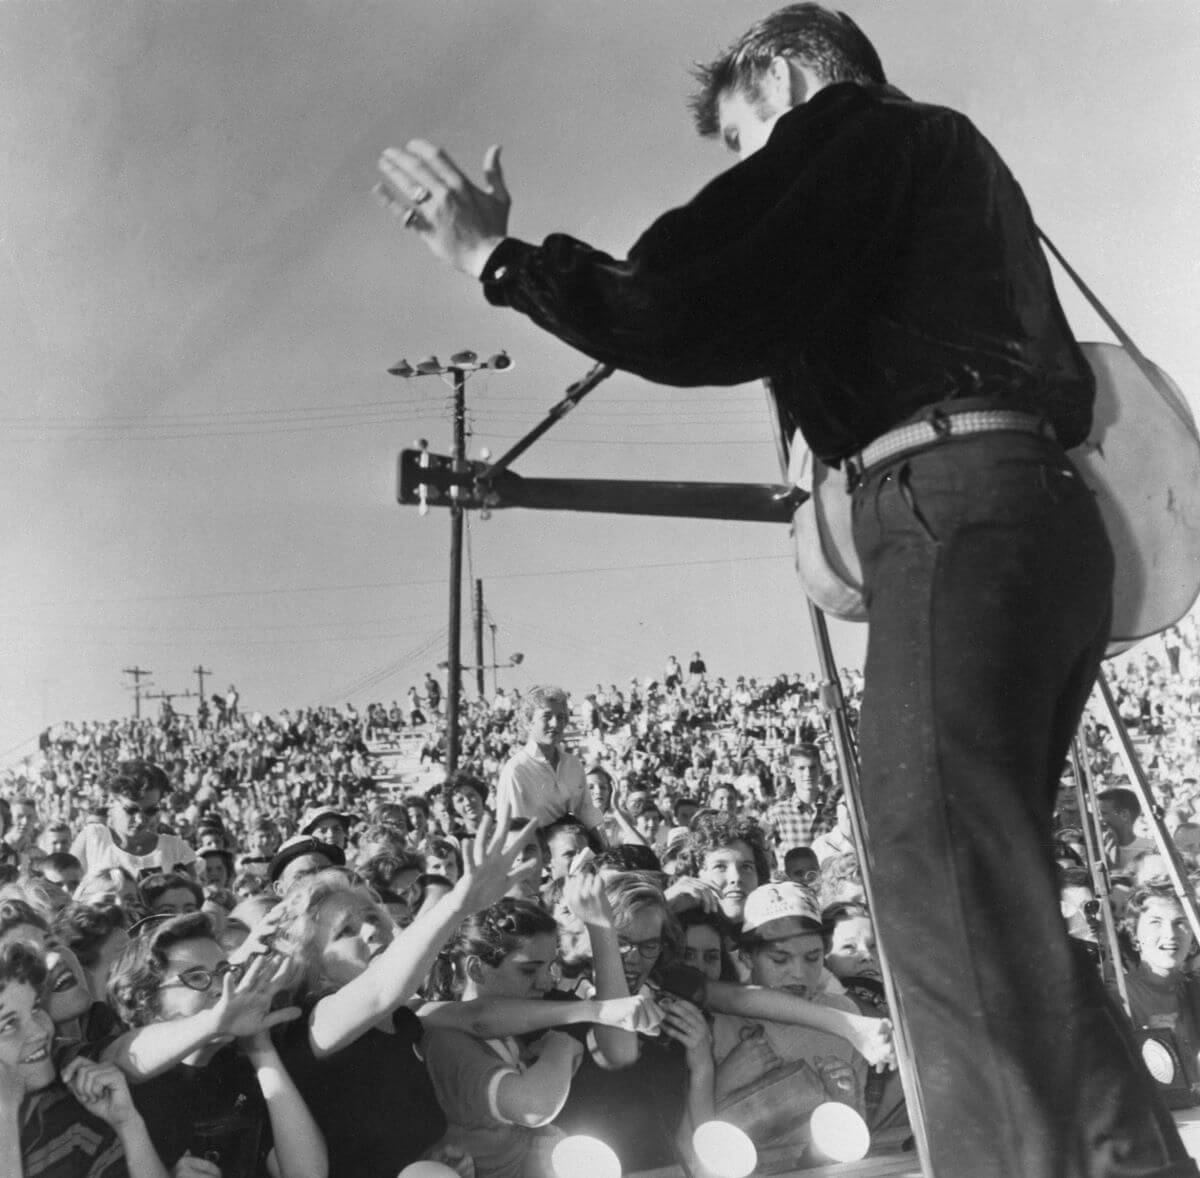 A black and white picture of Elvis Presley holding a guitar and waving at his audience.